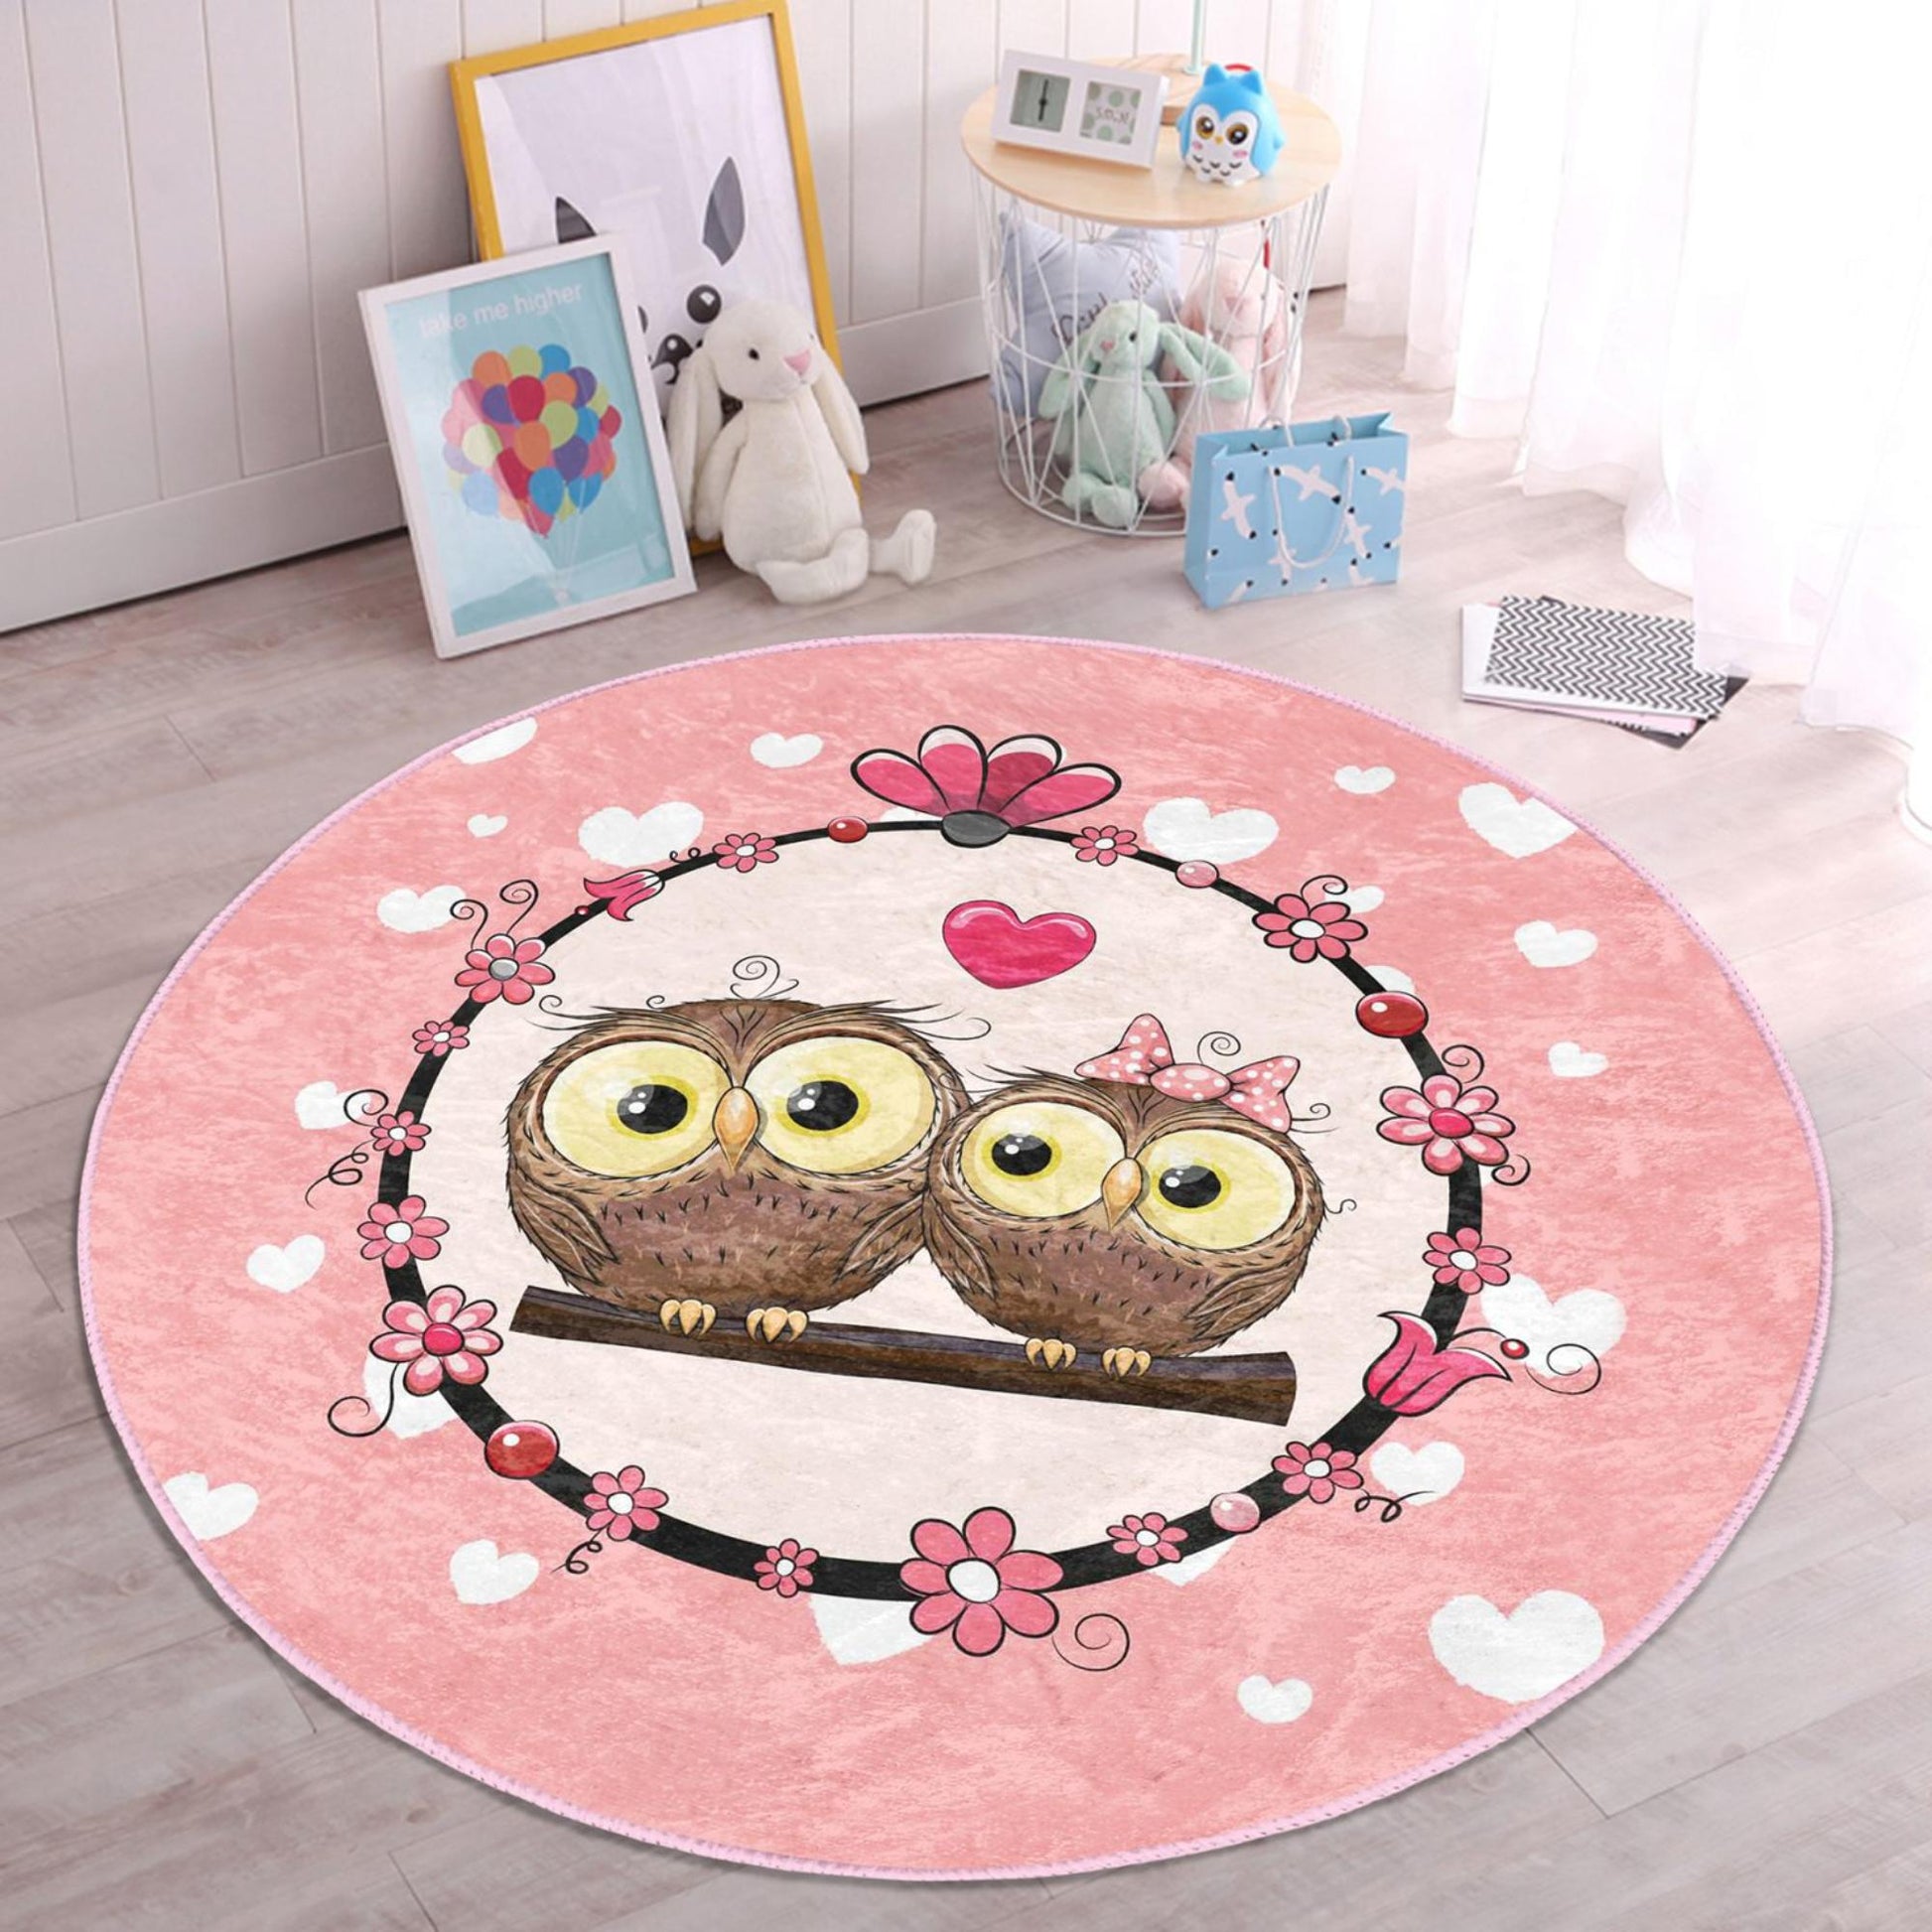 Imaginative kids rug featuring pink owl loves designs for cozy playtime.